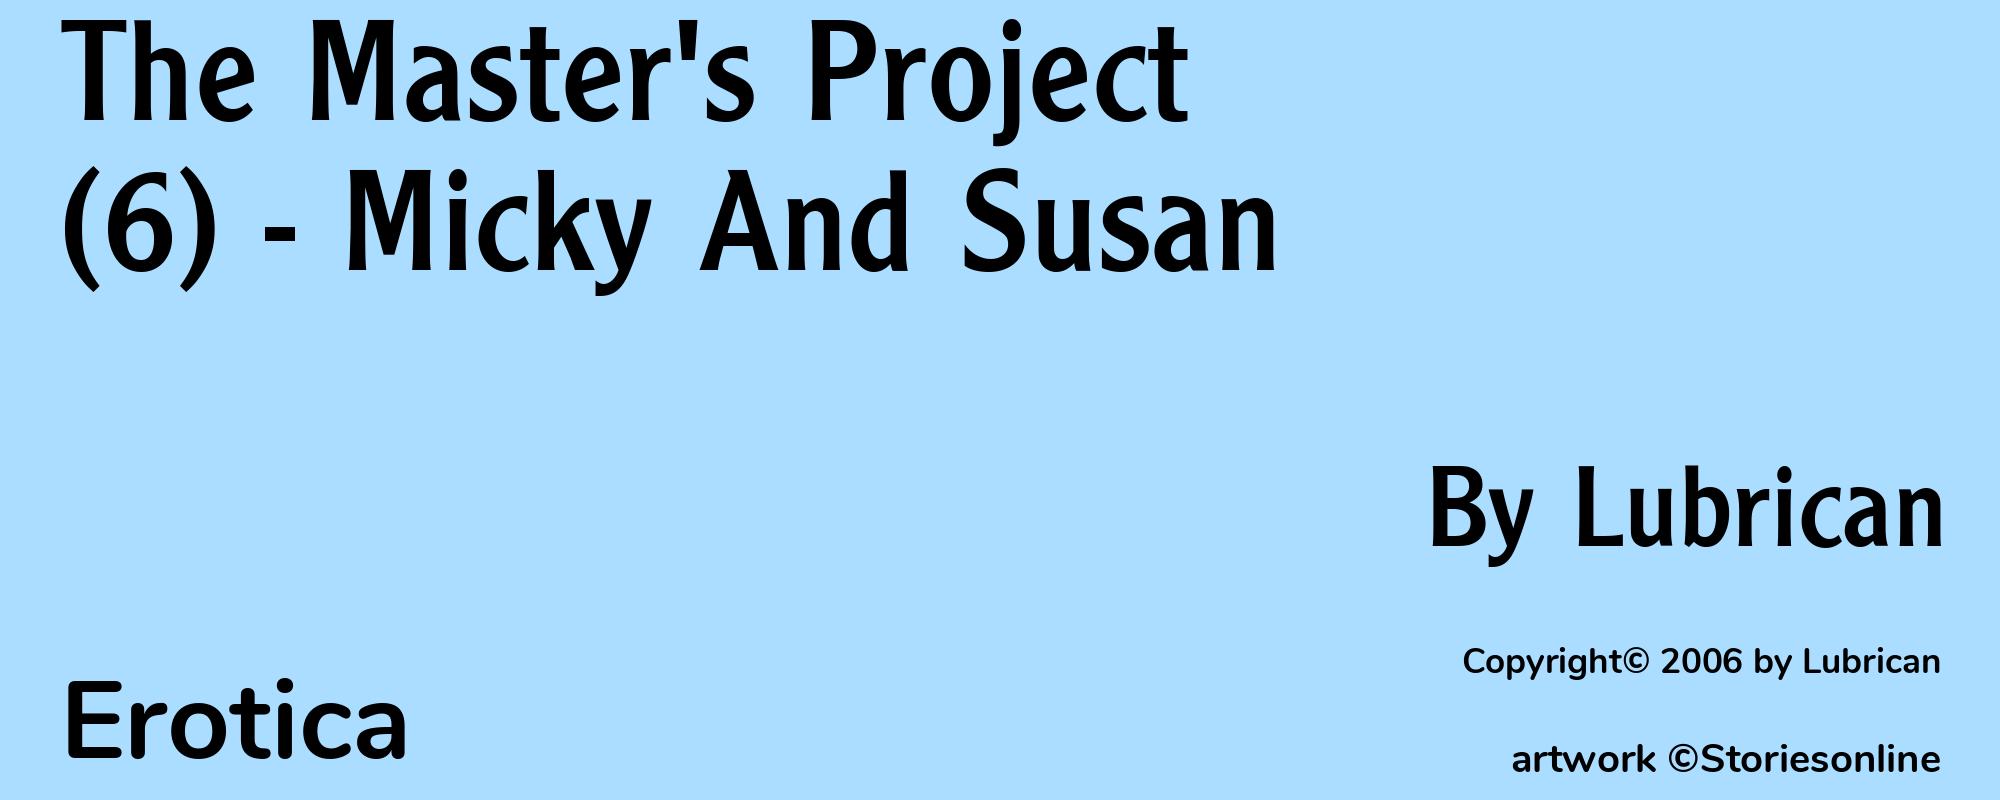 The Master's Project (6) - Micky And Susan - Cover